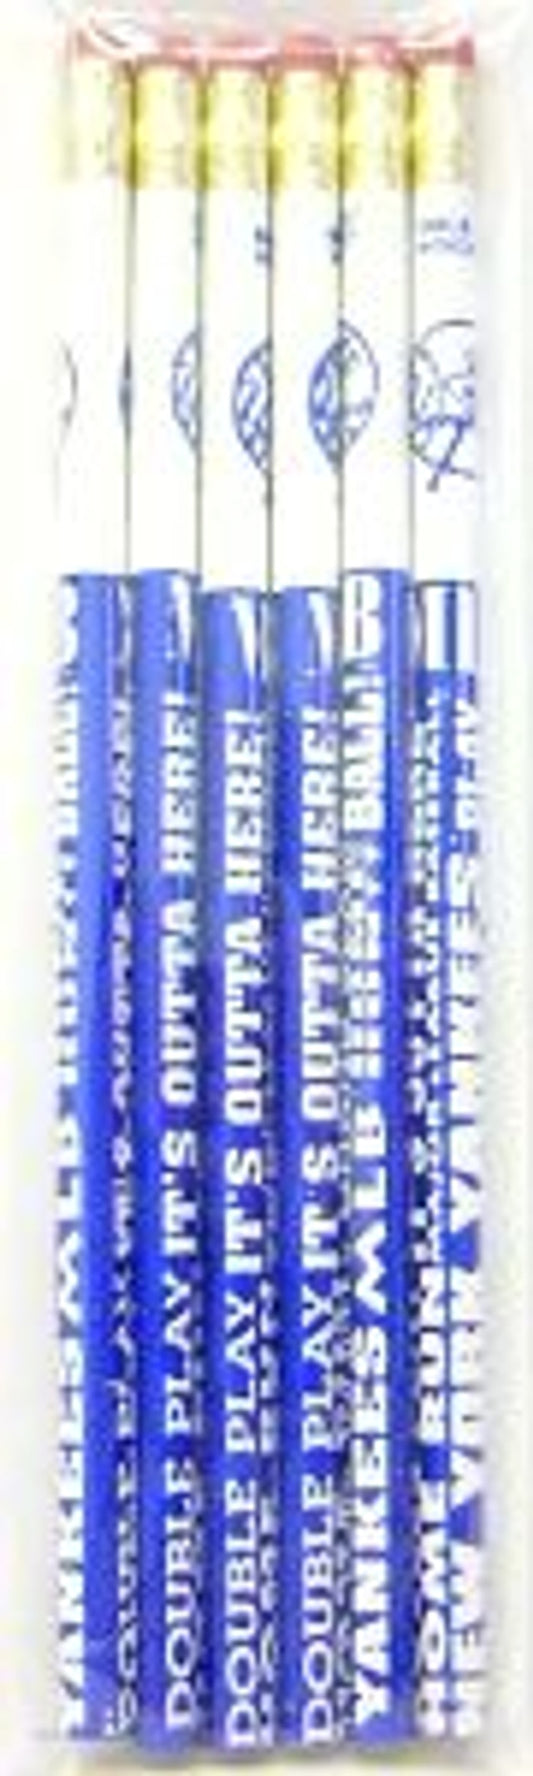 New York Yankees 2 pack of Pencils - 6 per pack by Wincraft